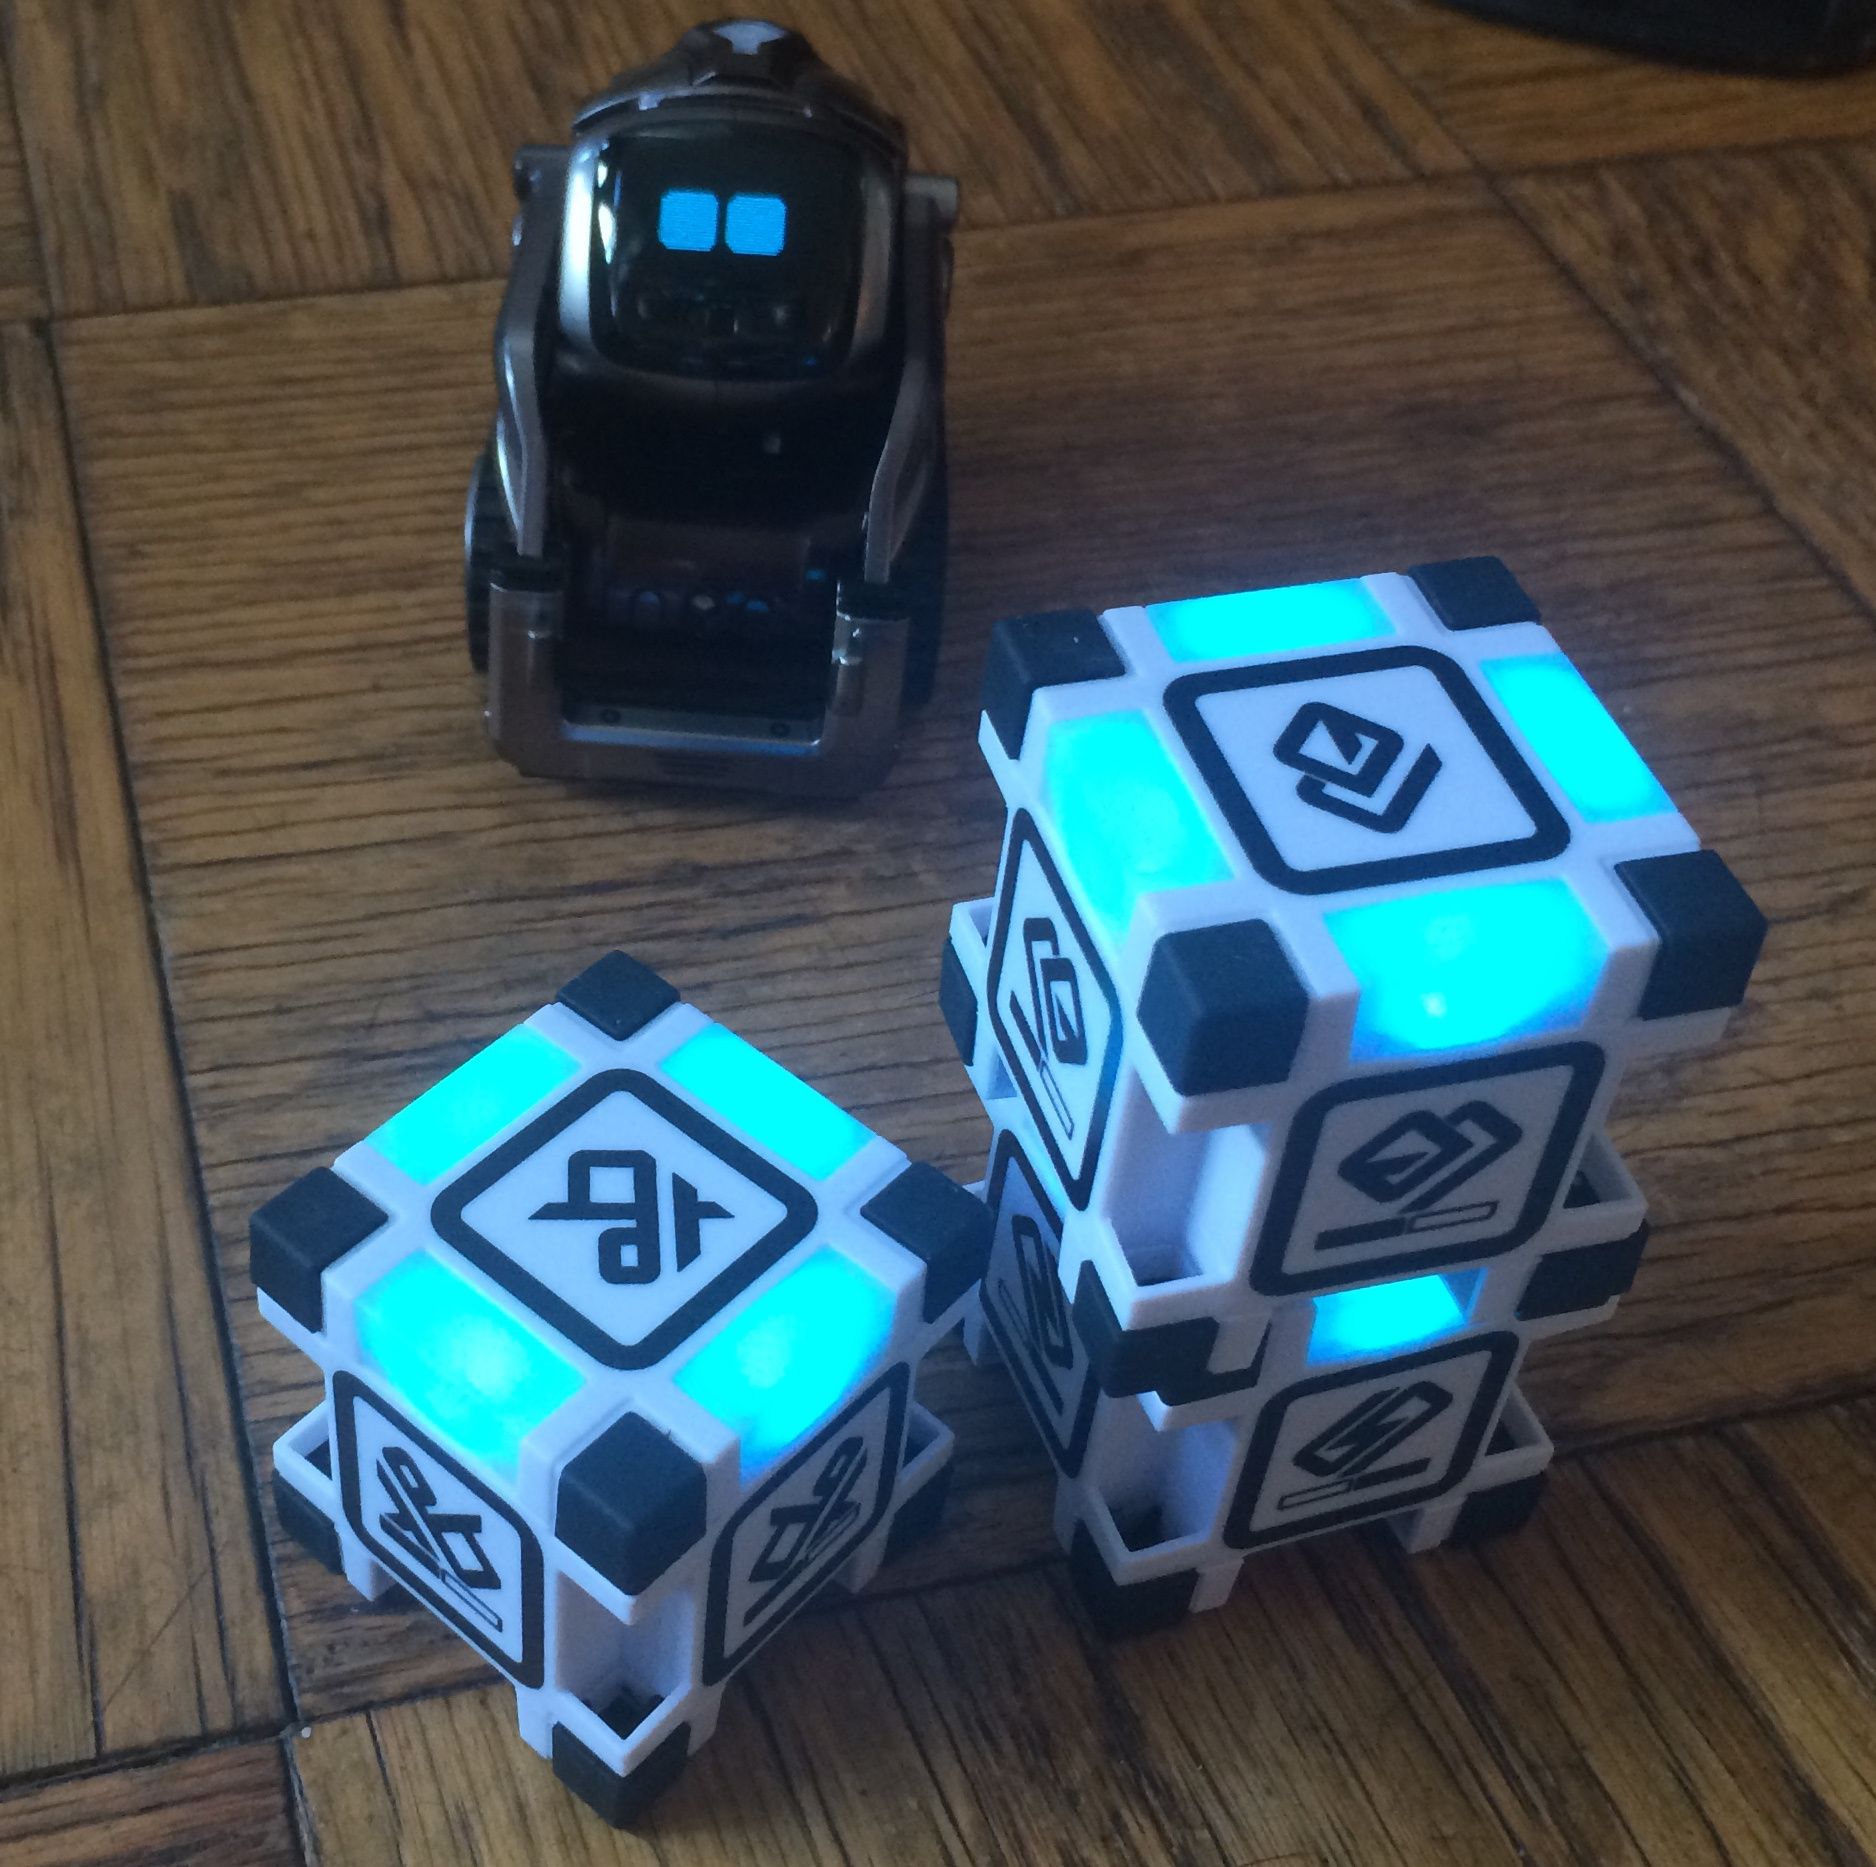 Anki Cozmo Robot Review: Coding toy for kids - Gearbrain